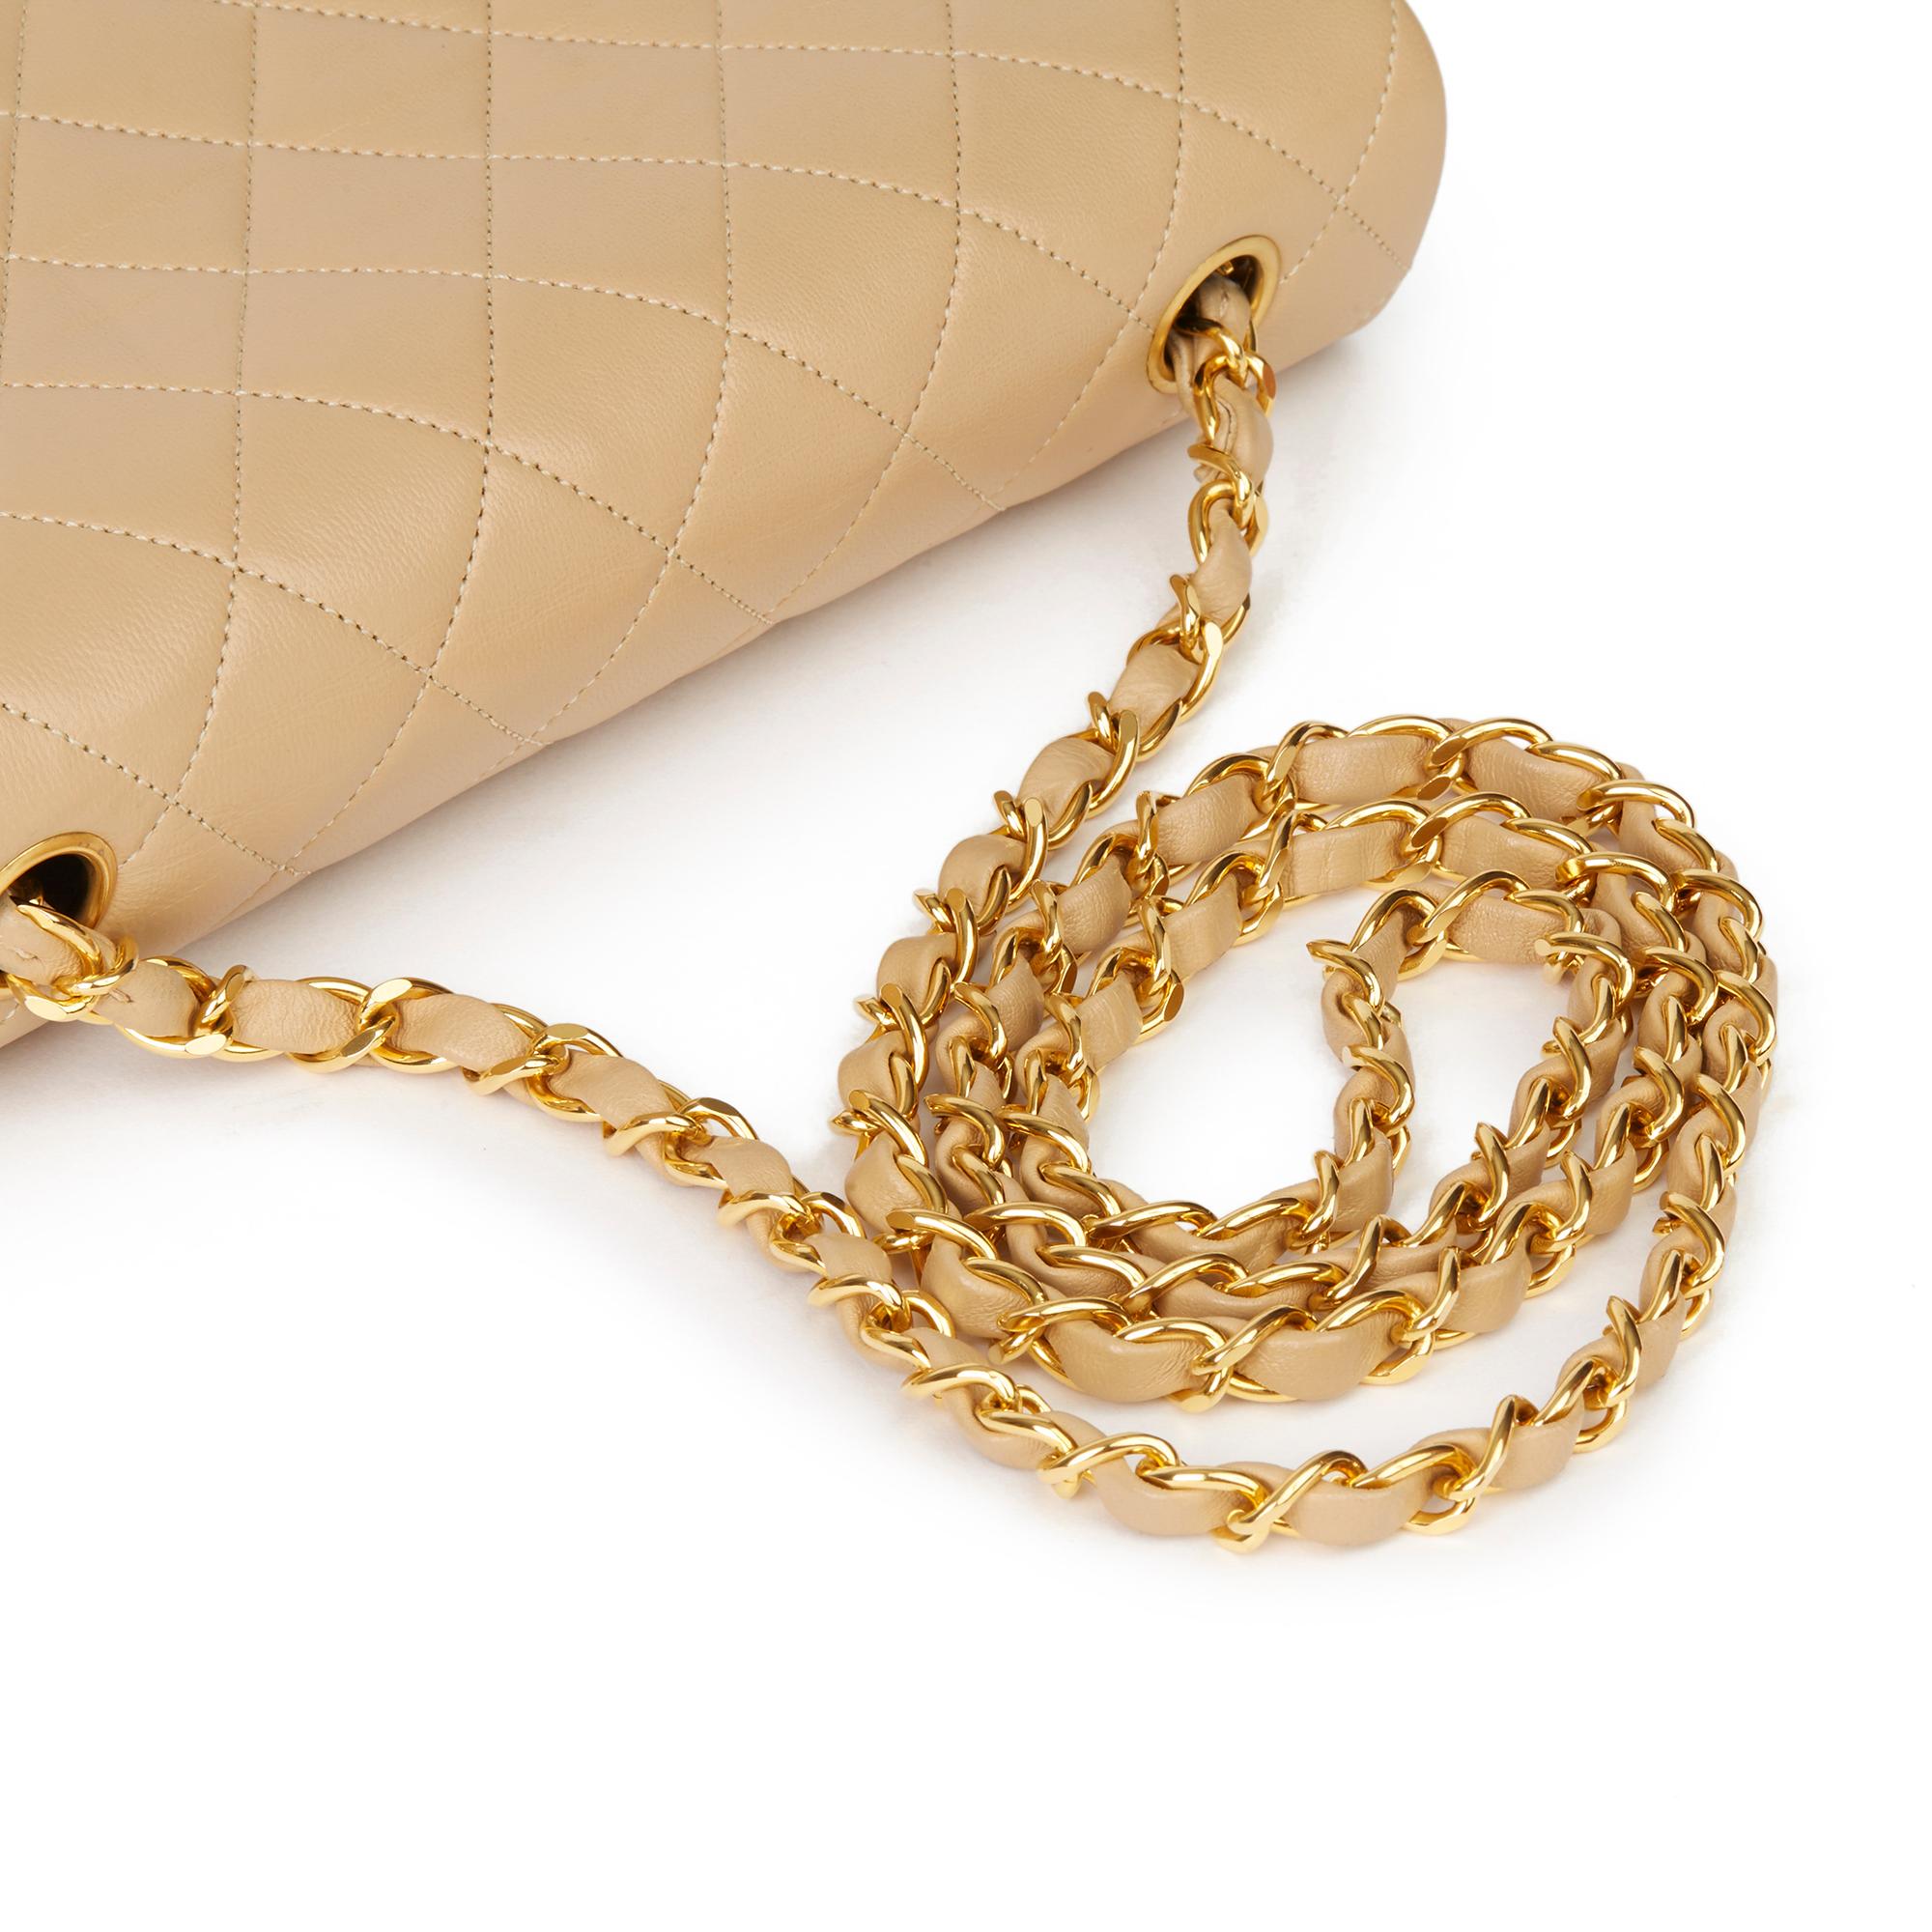 1991 Chanel Beige Quilted Lambskin Vintage Small Classic Single Full Flap Bag 3